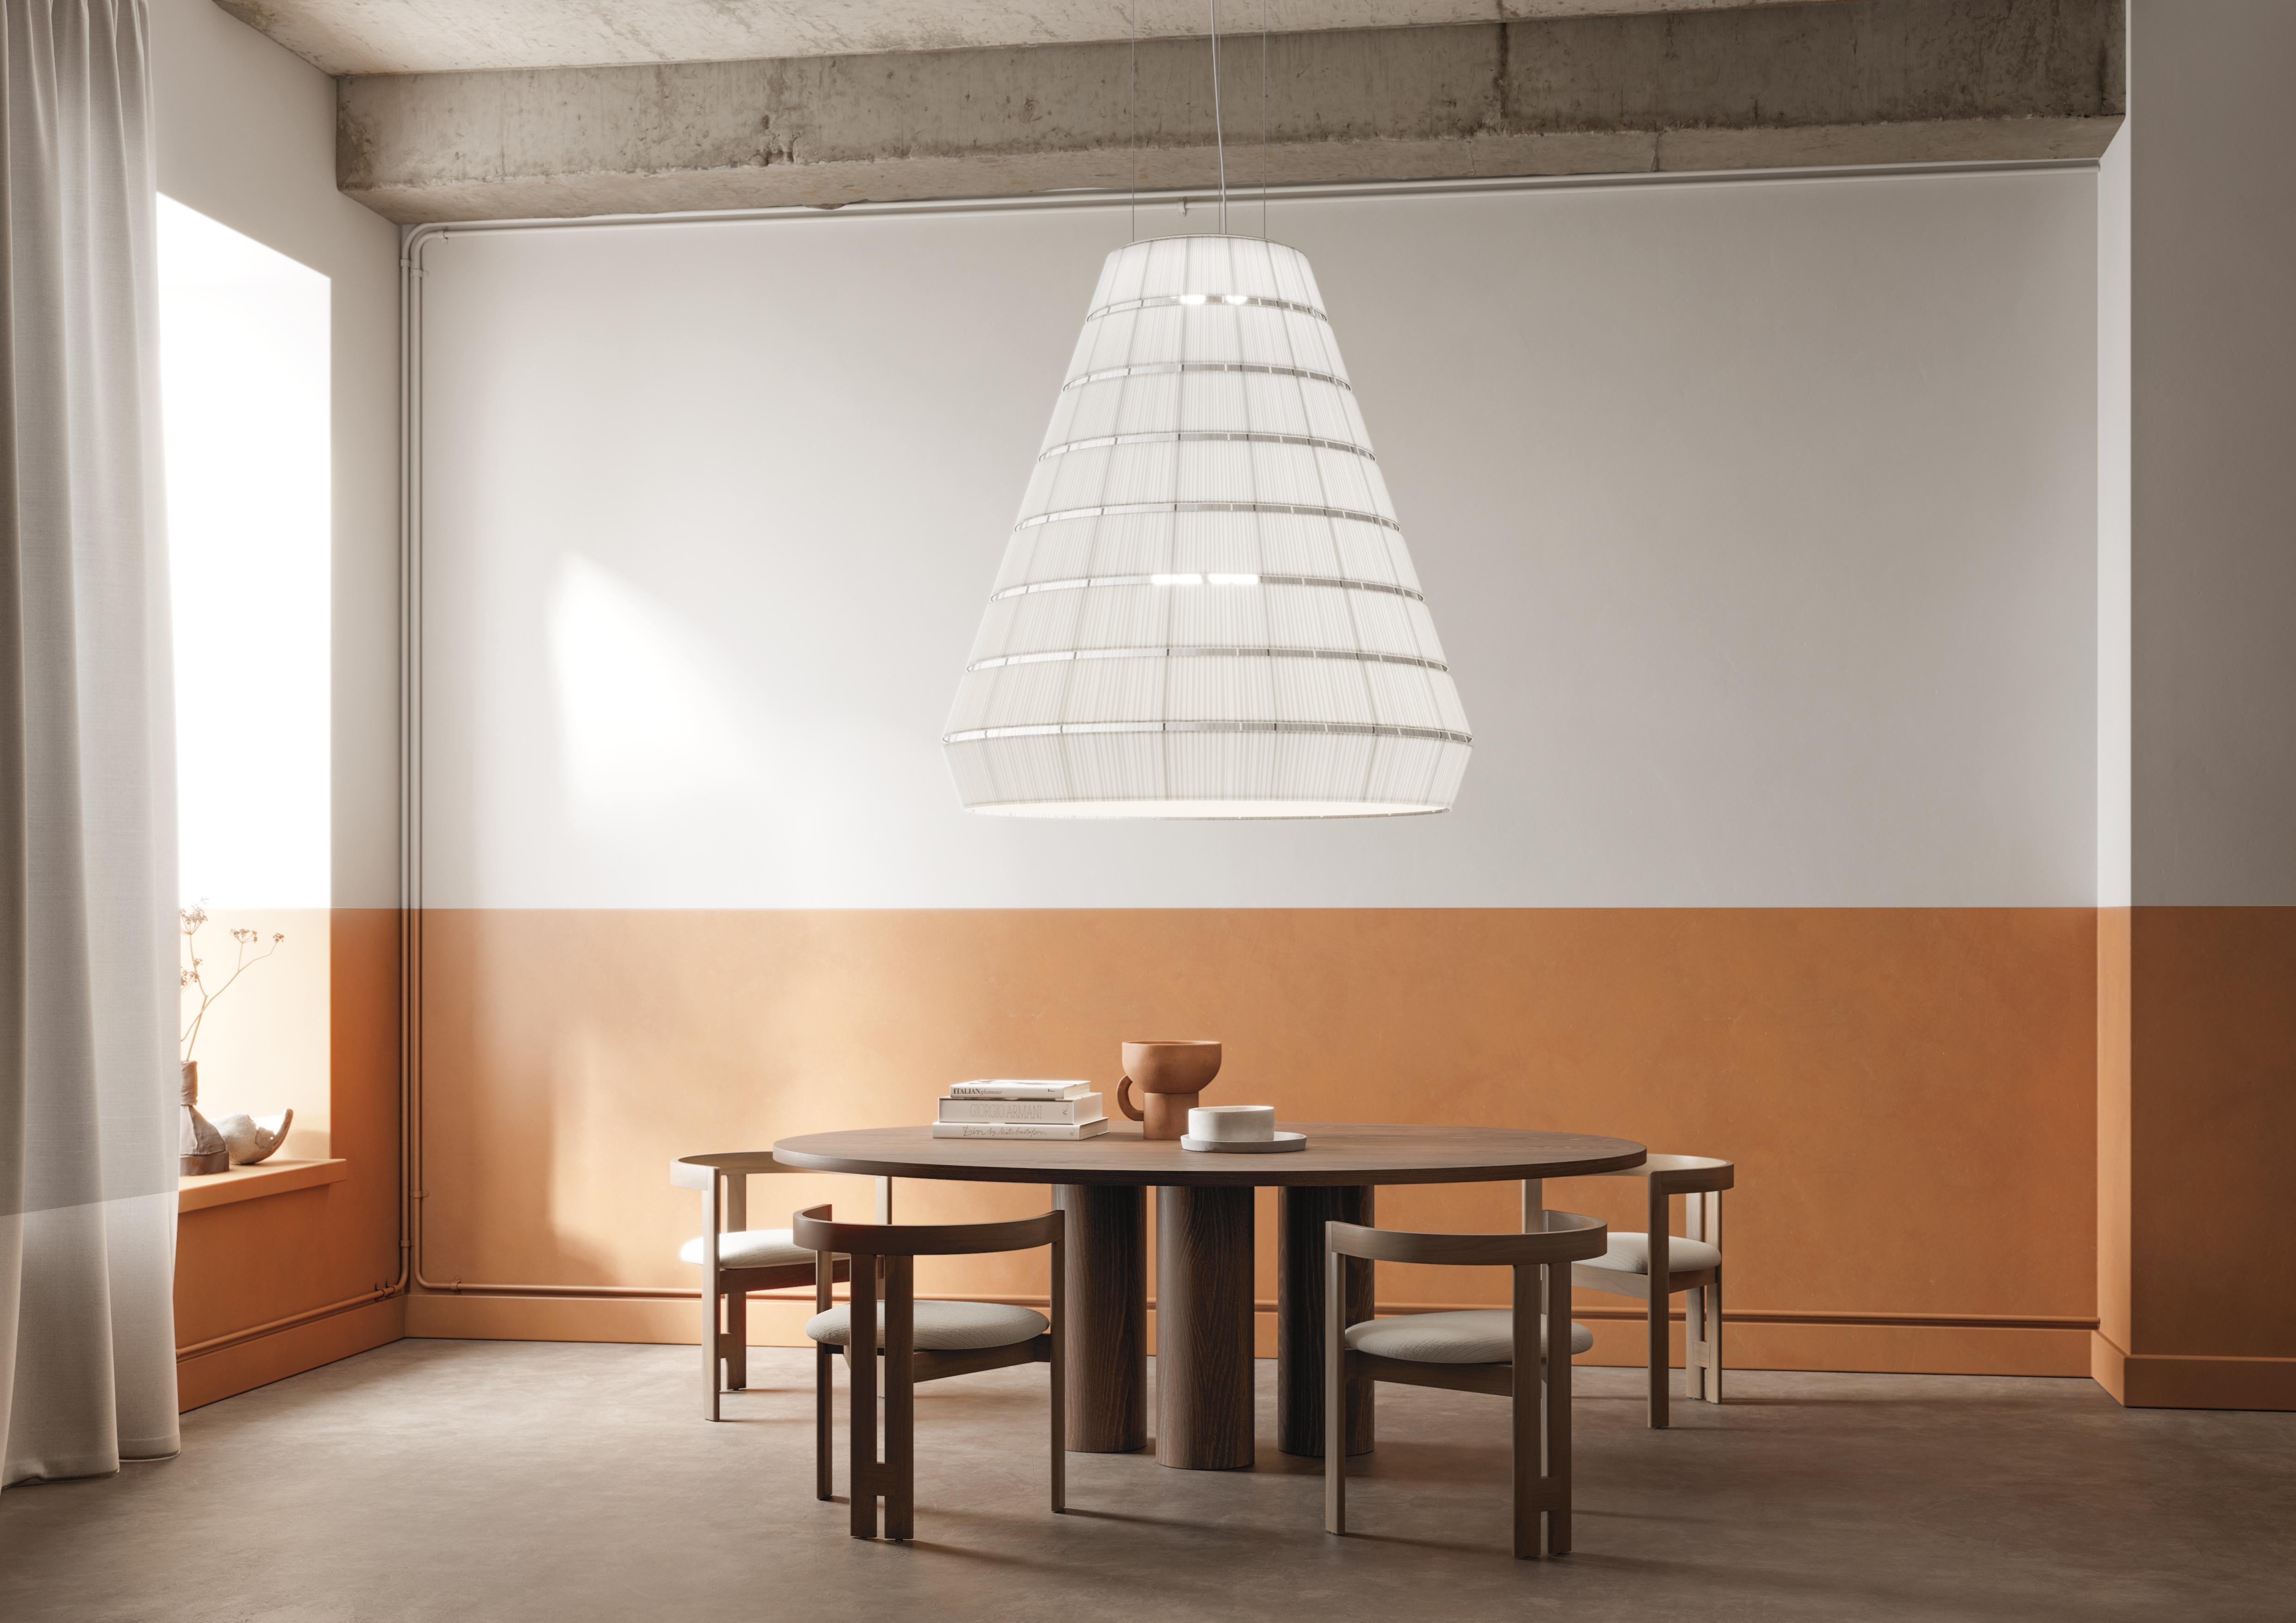 Axolight Layers Type D Pendant Lamp in White Steel by Vanessa Vivian

Layers is a collection of suspension lamps with a strong sculptural presence, obtained through combinations of different geometric shapes. Its layered system is modular, which